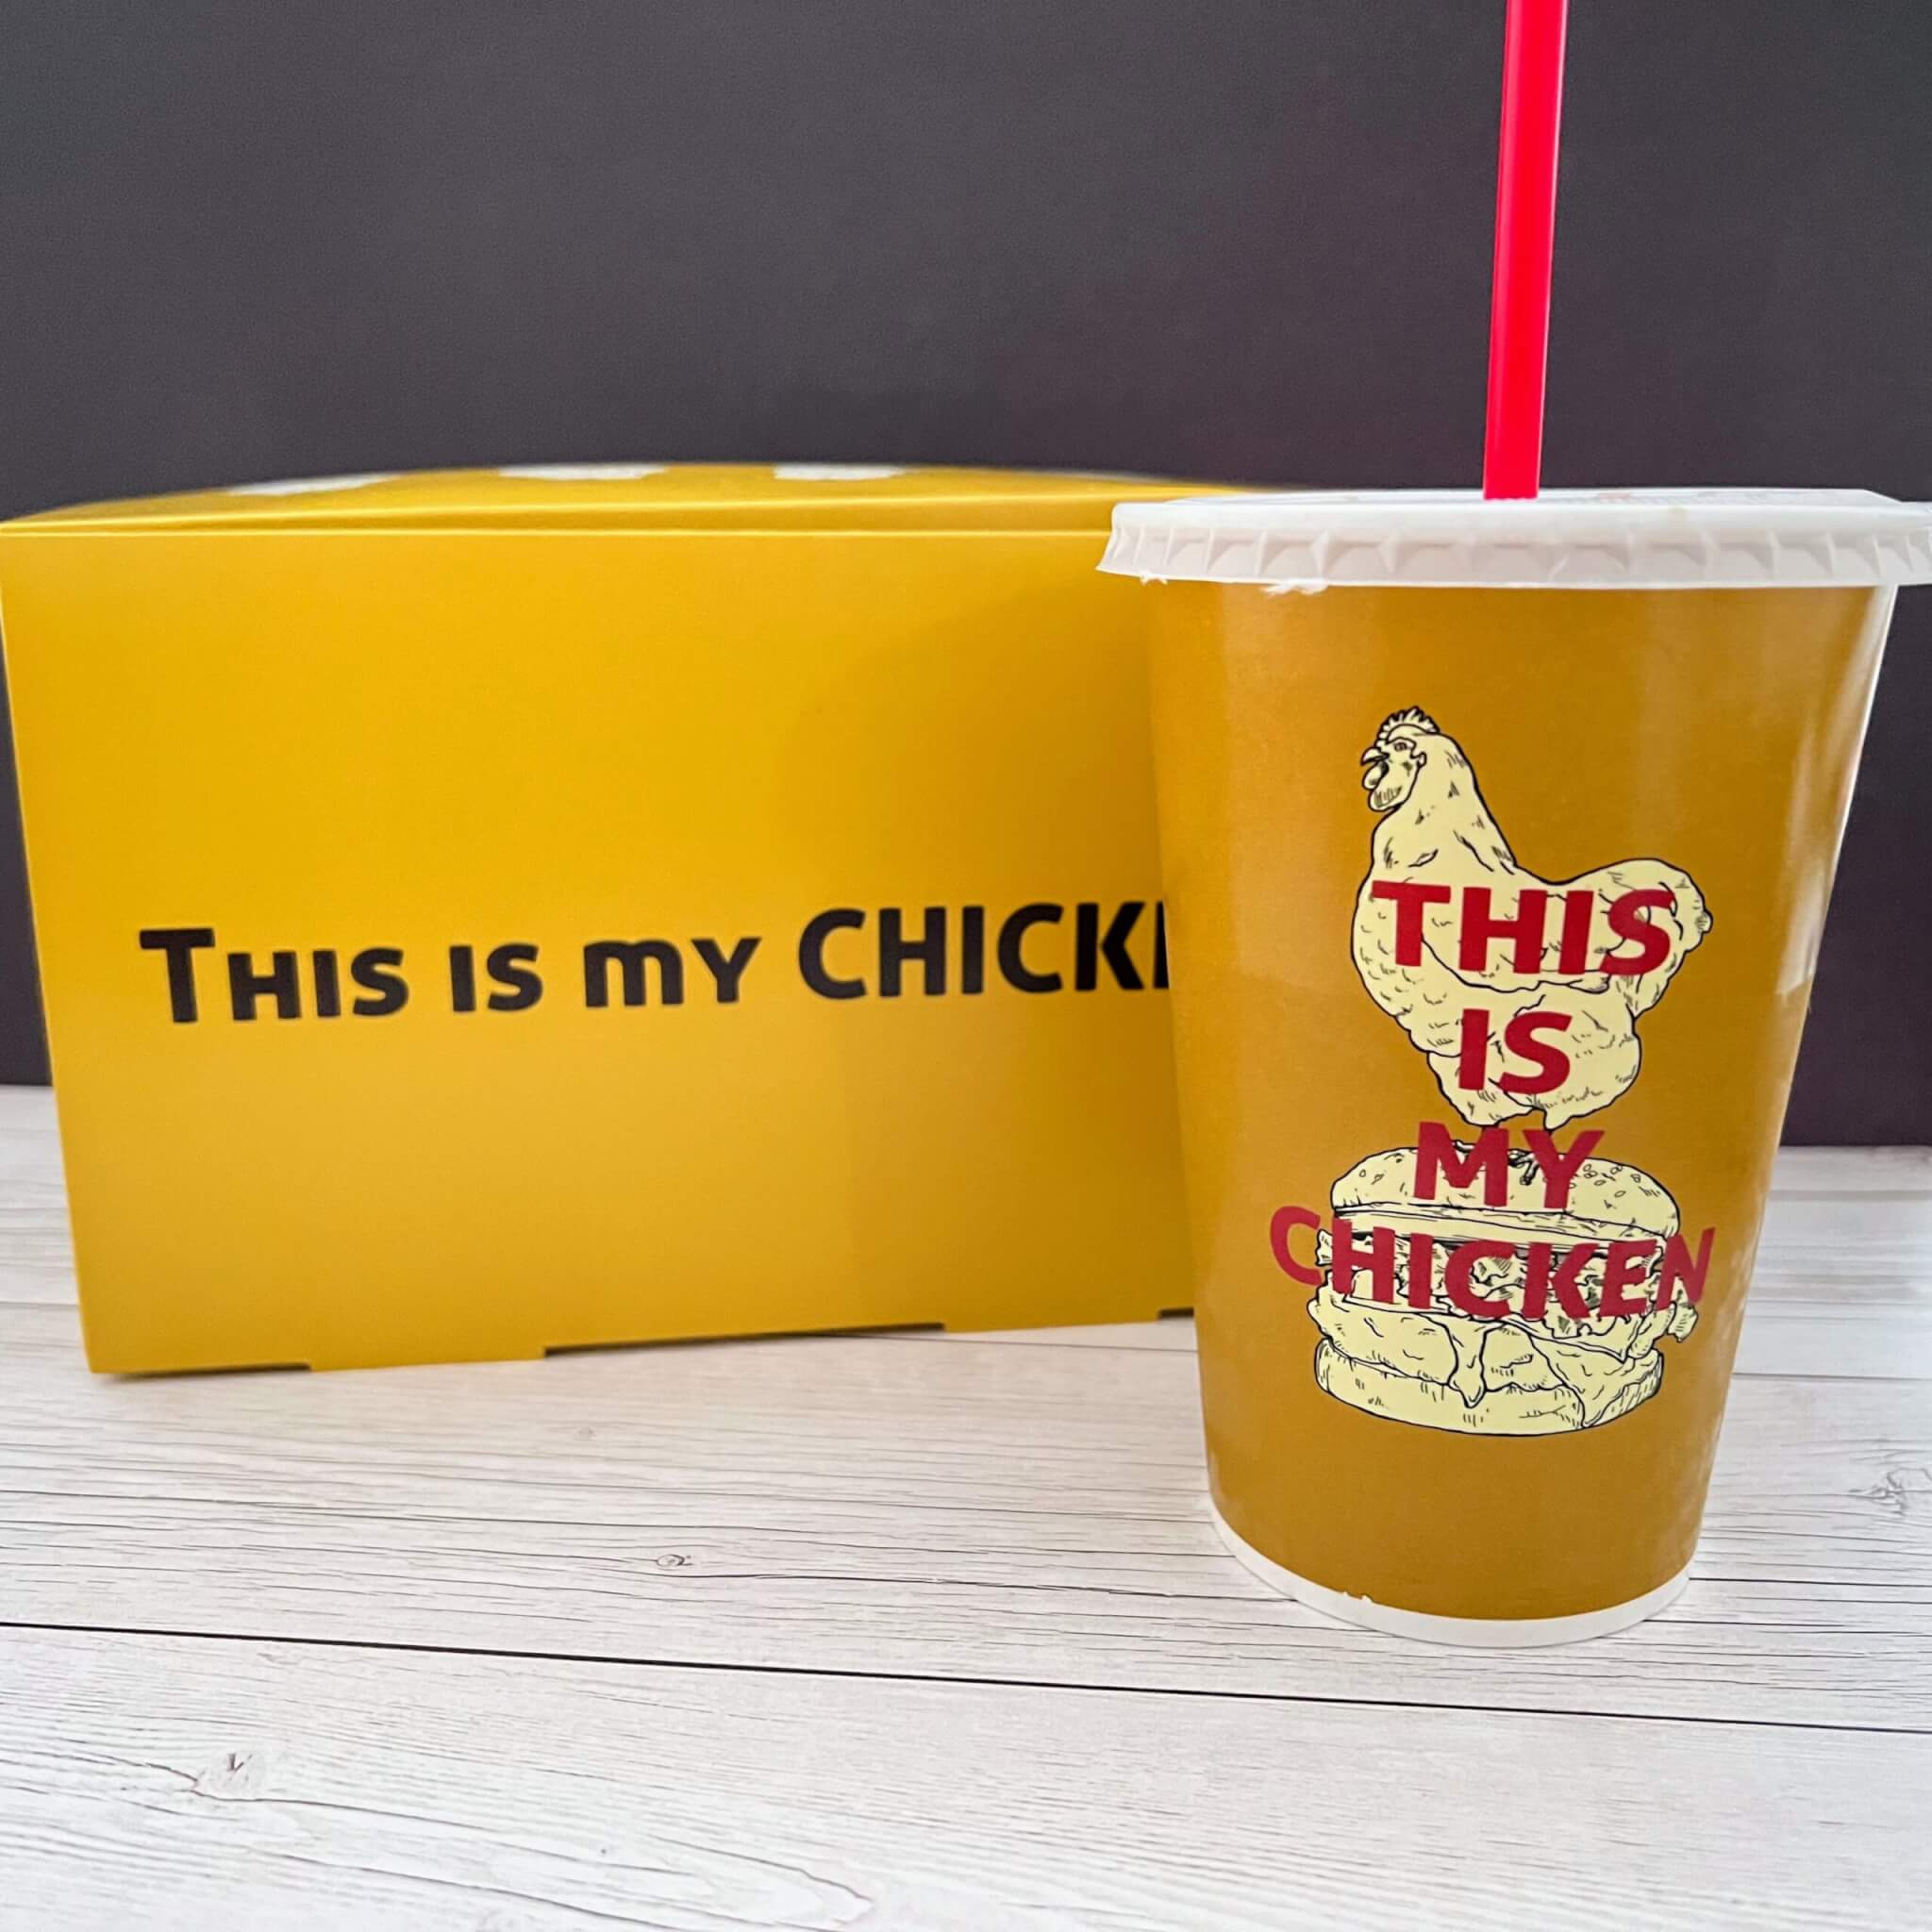 THIS IS MY CHICKENテイクアウトの商品